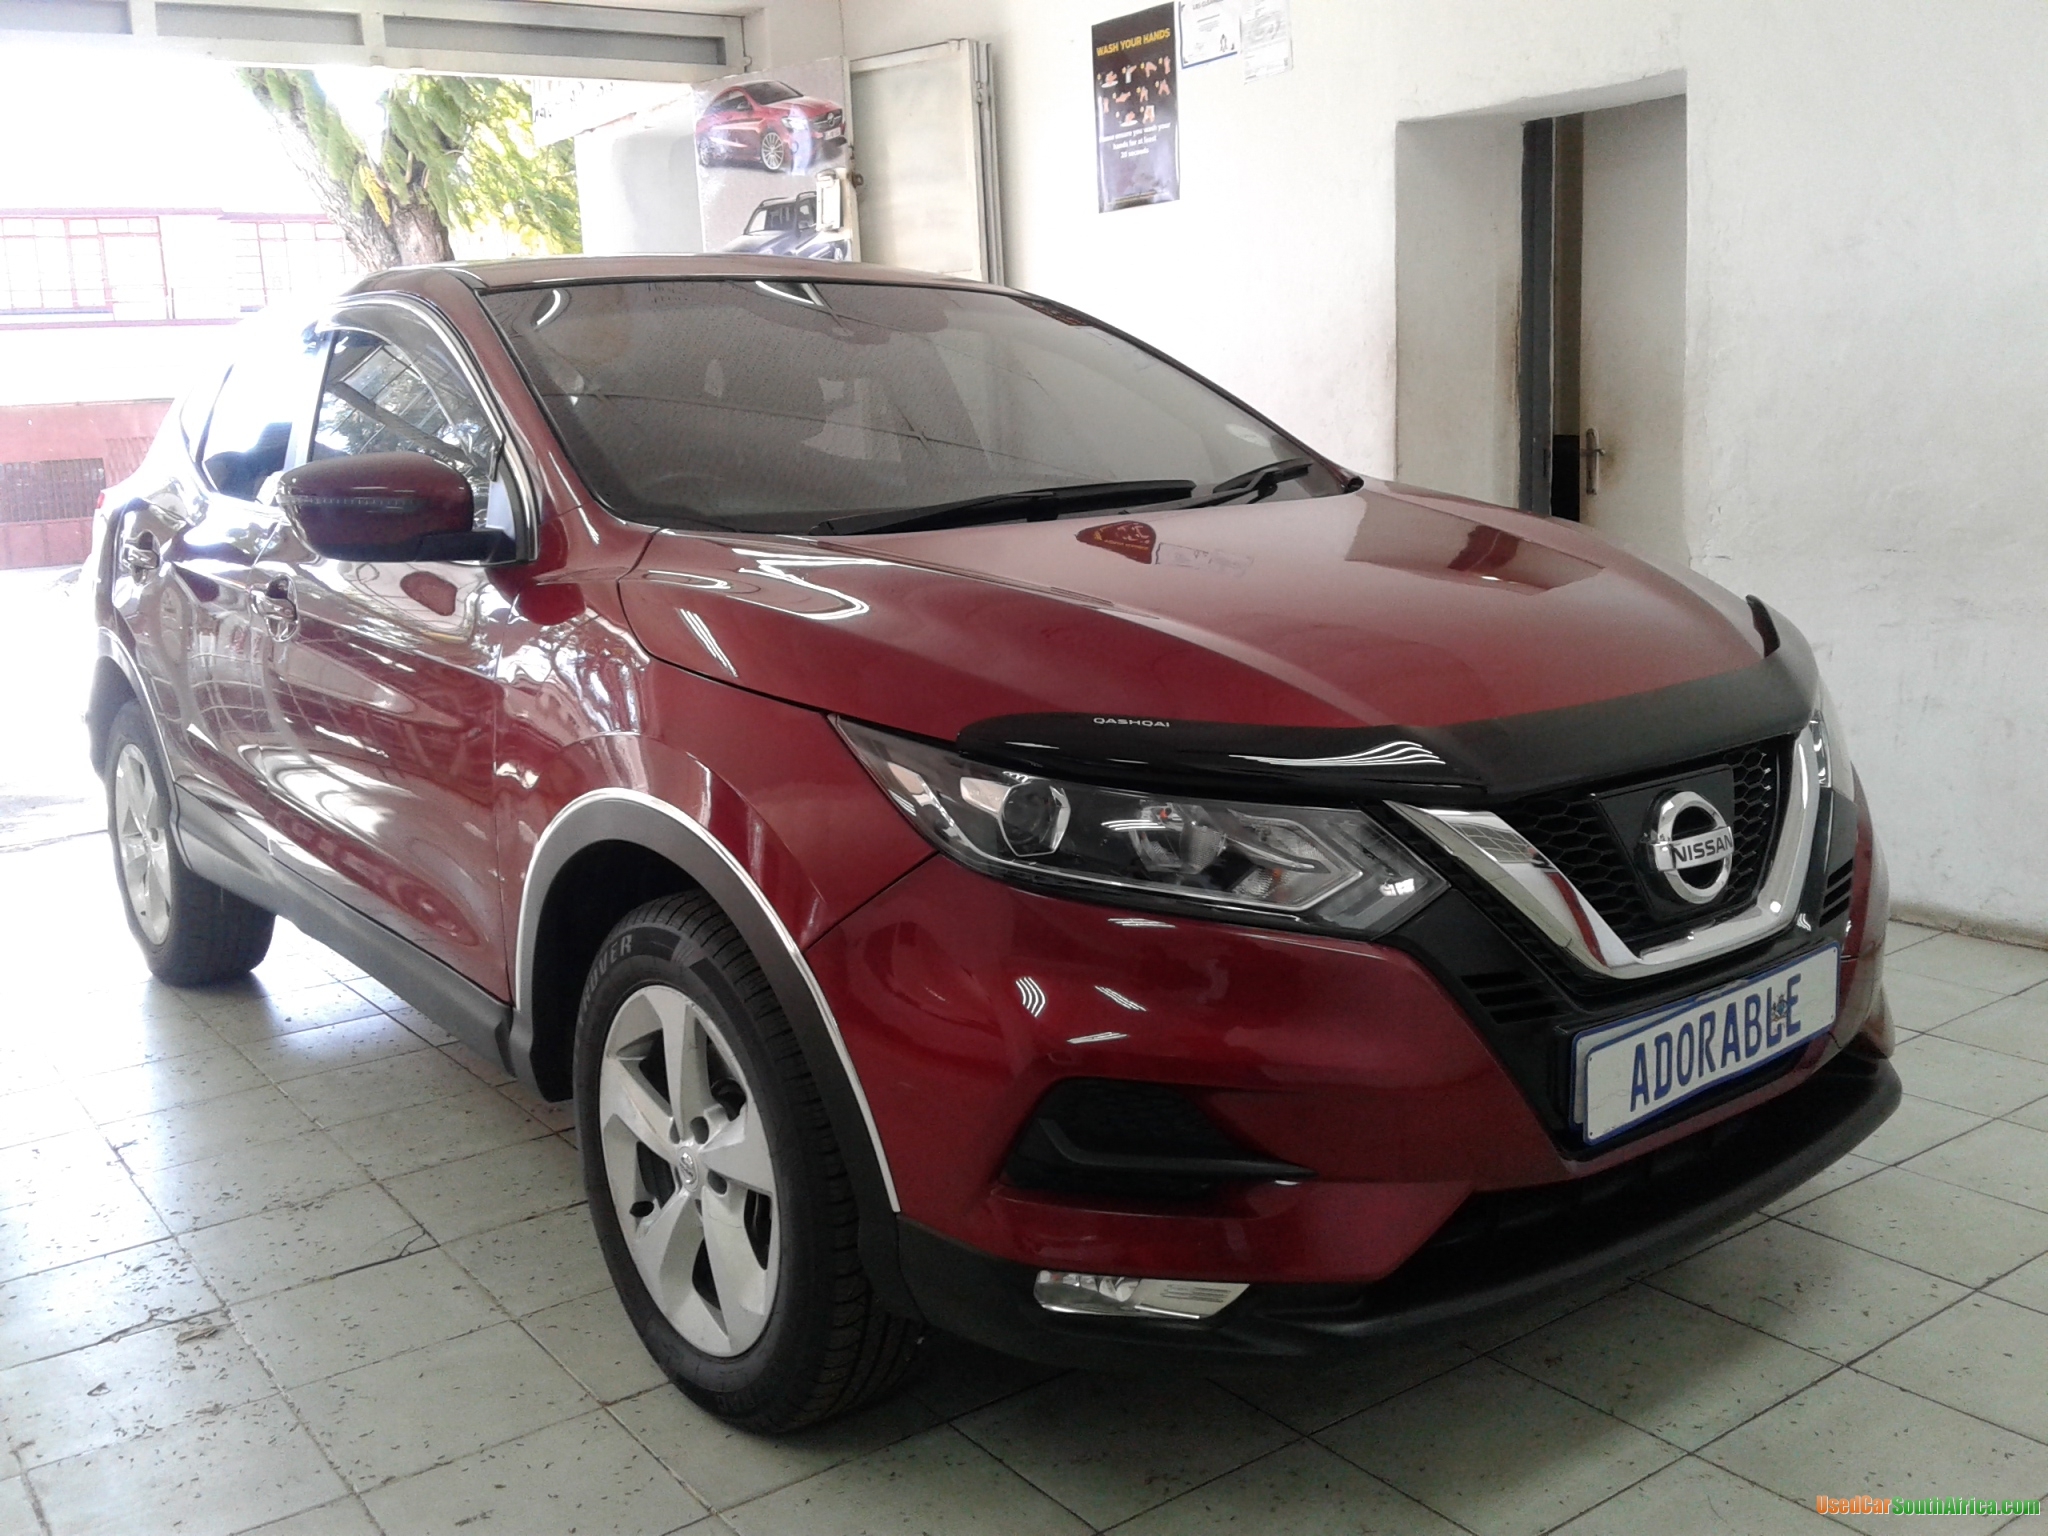 2018 Nissan Qashqai 1.2 ACENTA used car for sale in